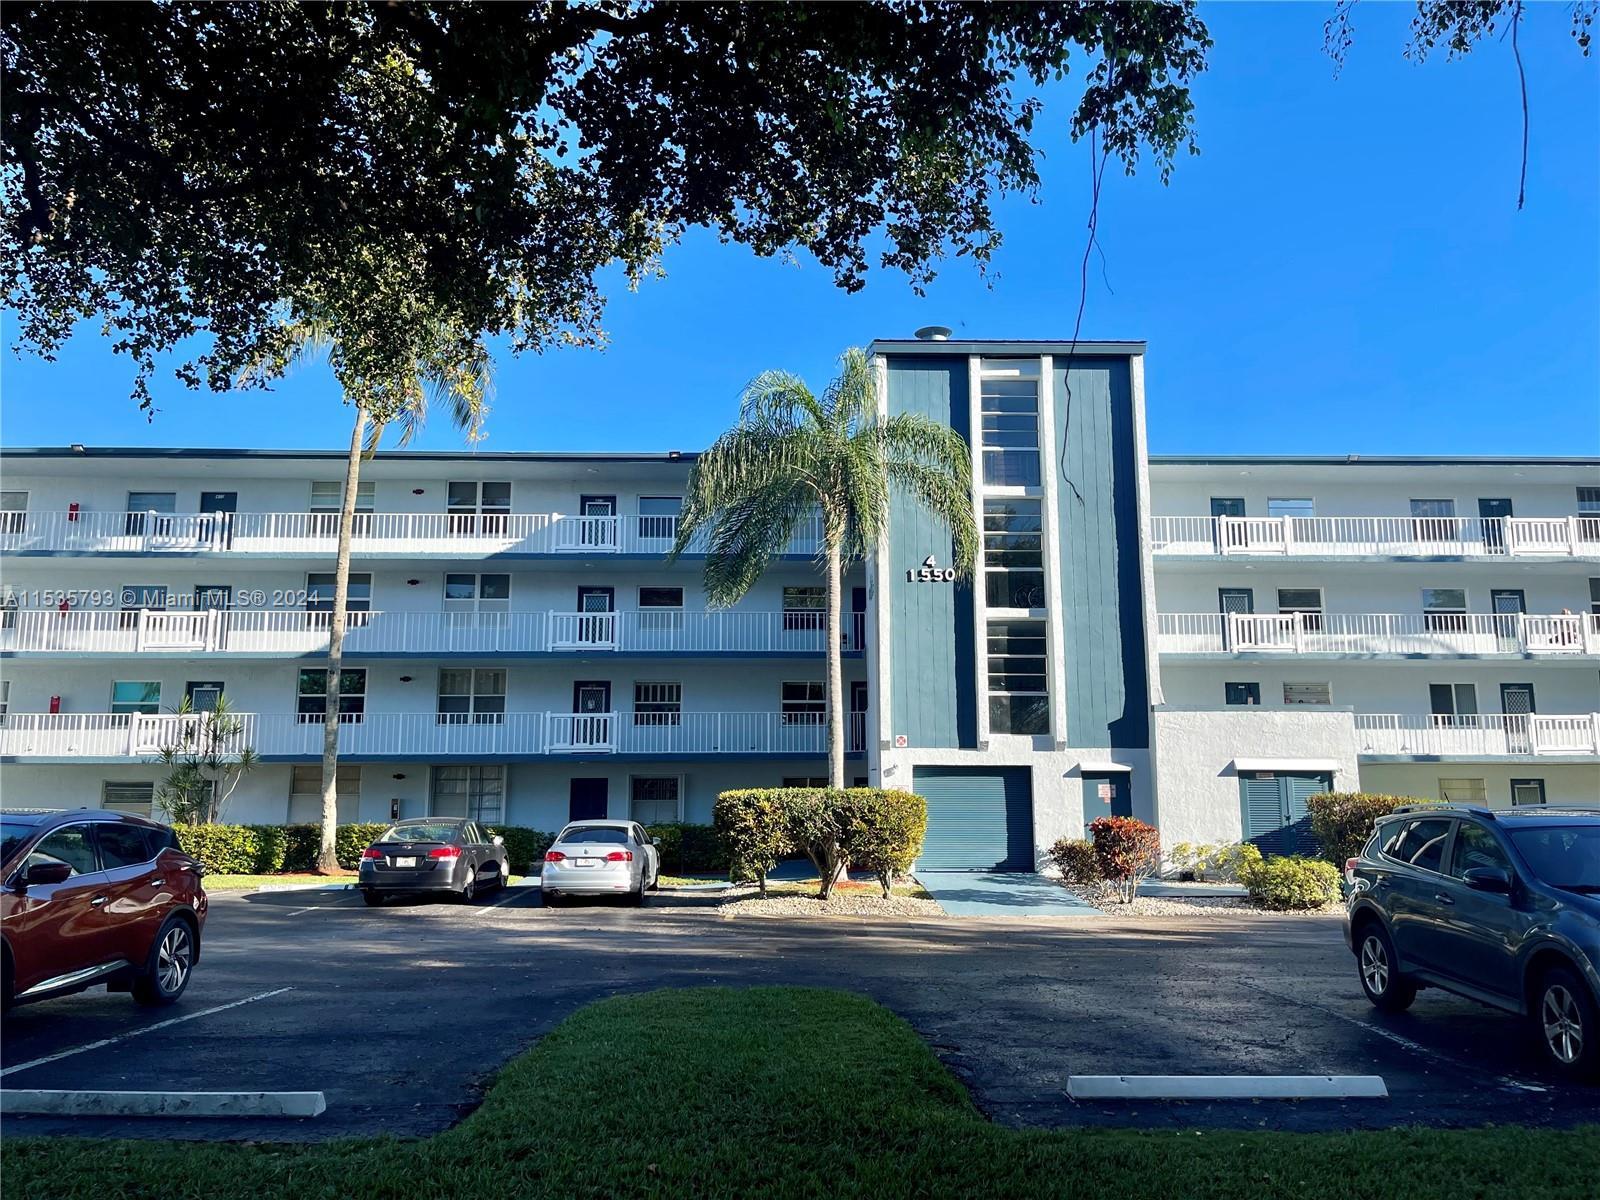 Photo of 1550 NW 80th Ave #301 in Margate, FL